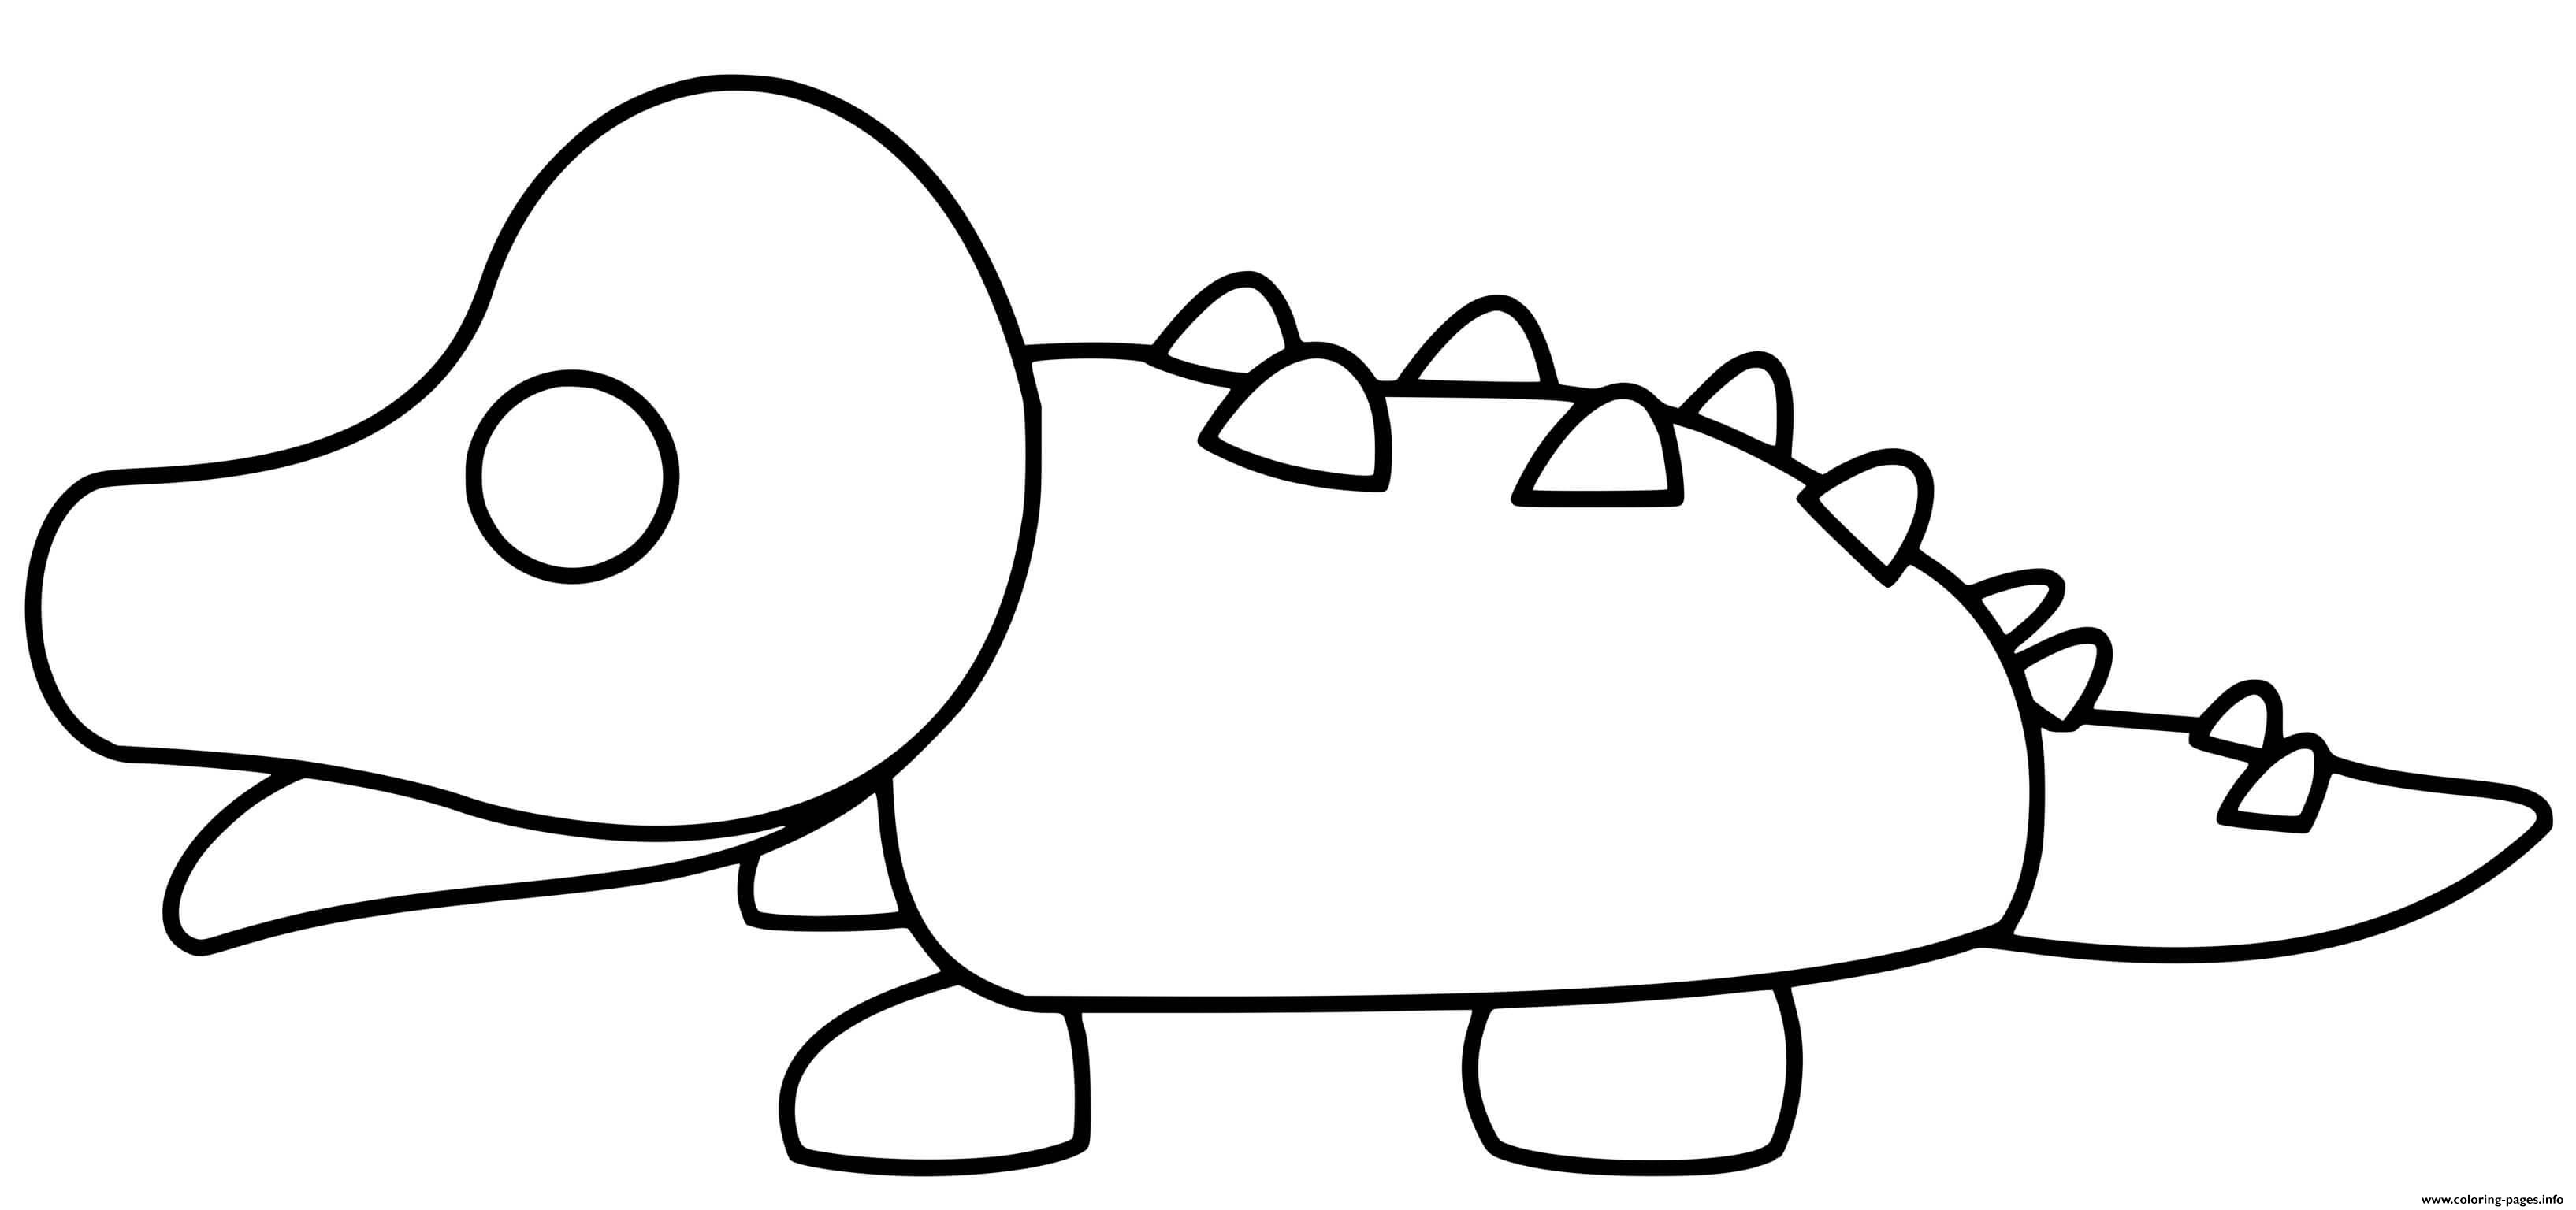 Roblox Adopt Me Crocodile Coloring Pages Printable - roblox coloring pages adopt me pets